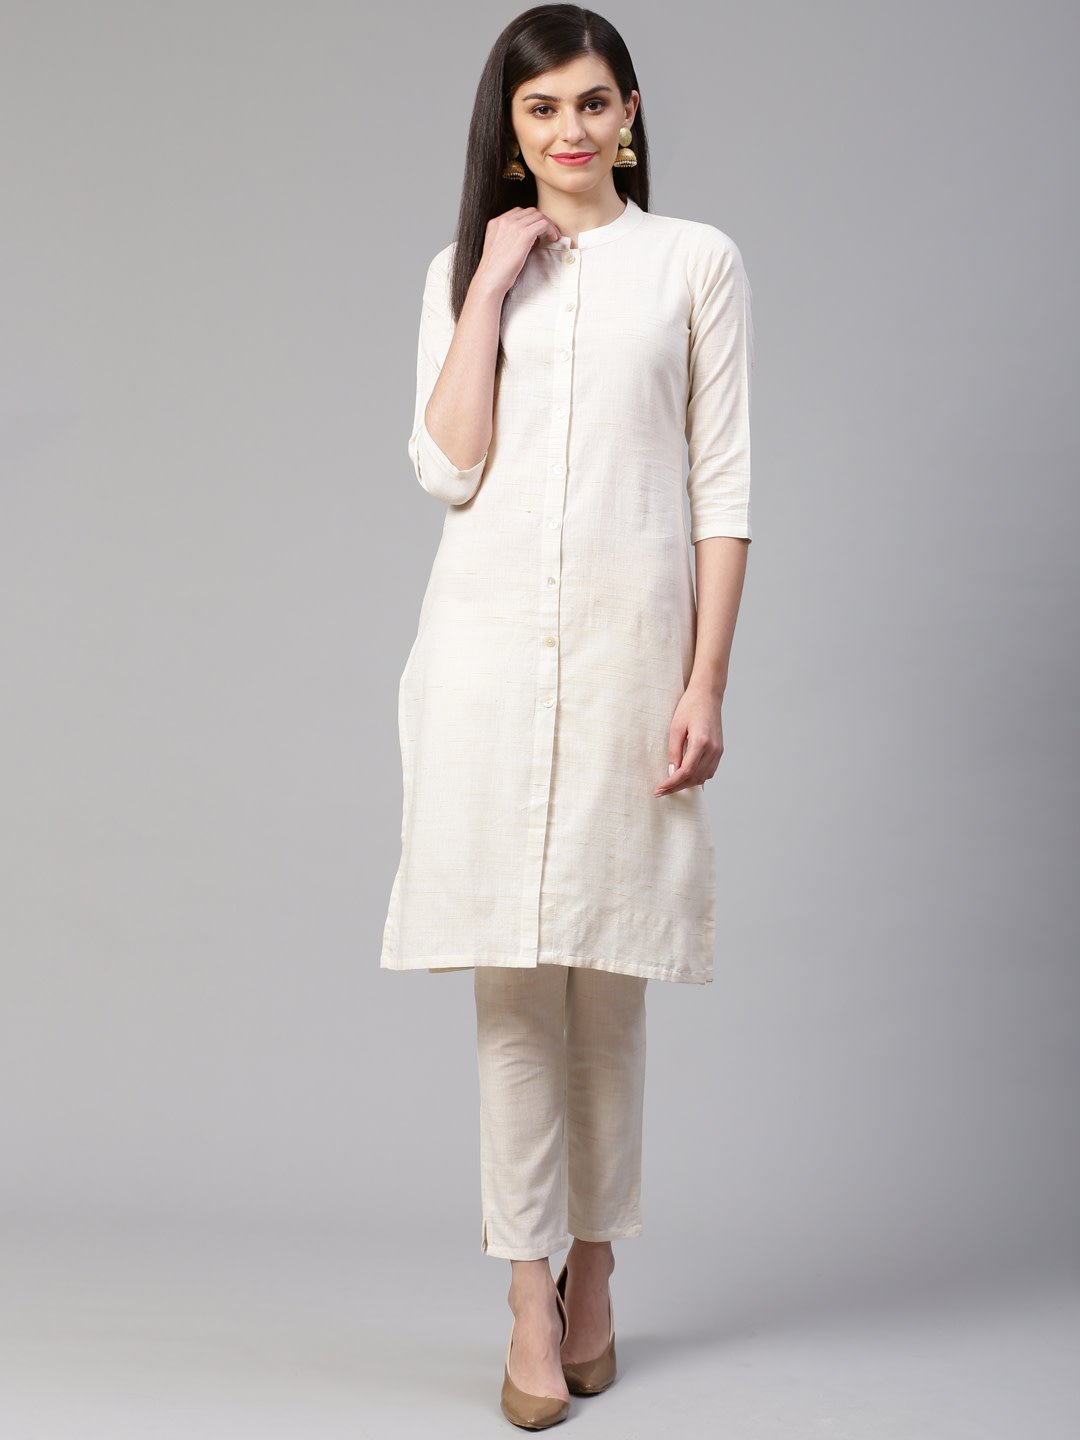 Women's Off White Woven Design Kurta with Trousers - Jompers